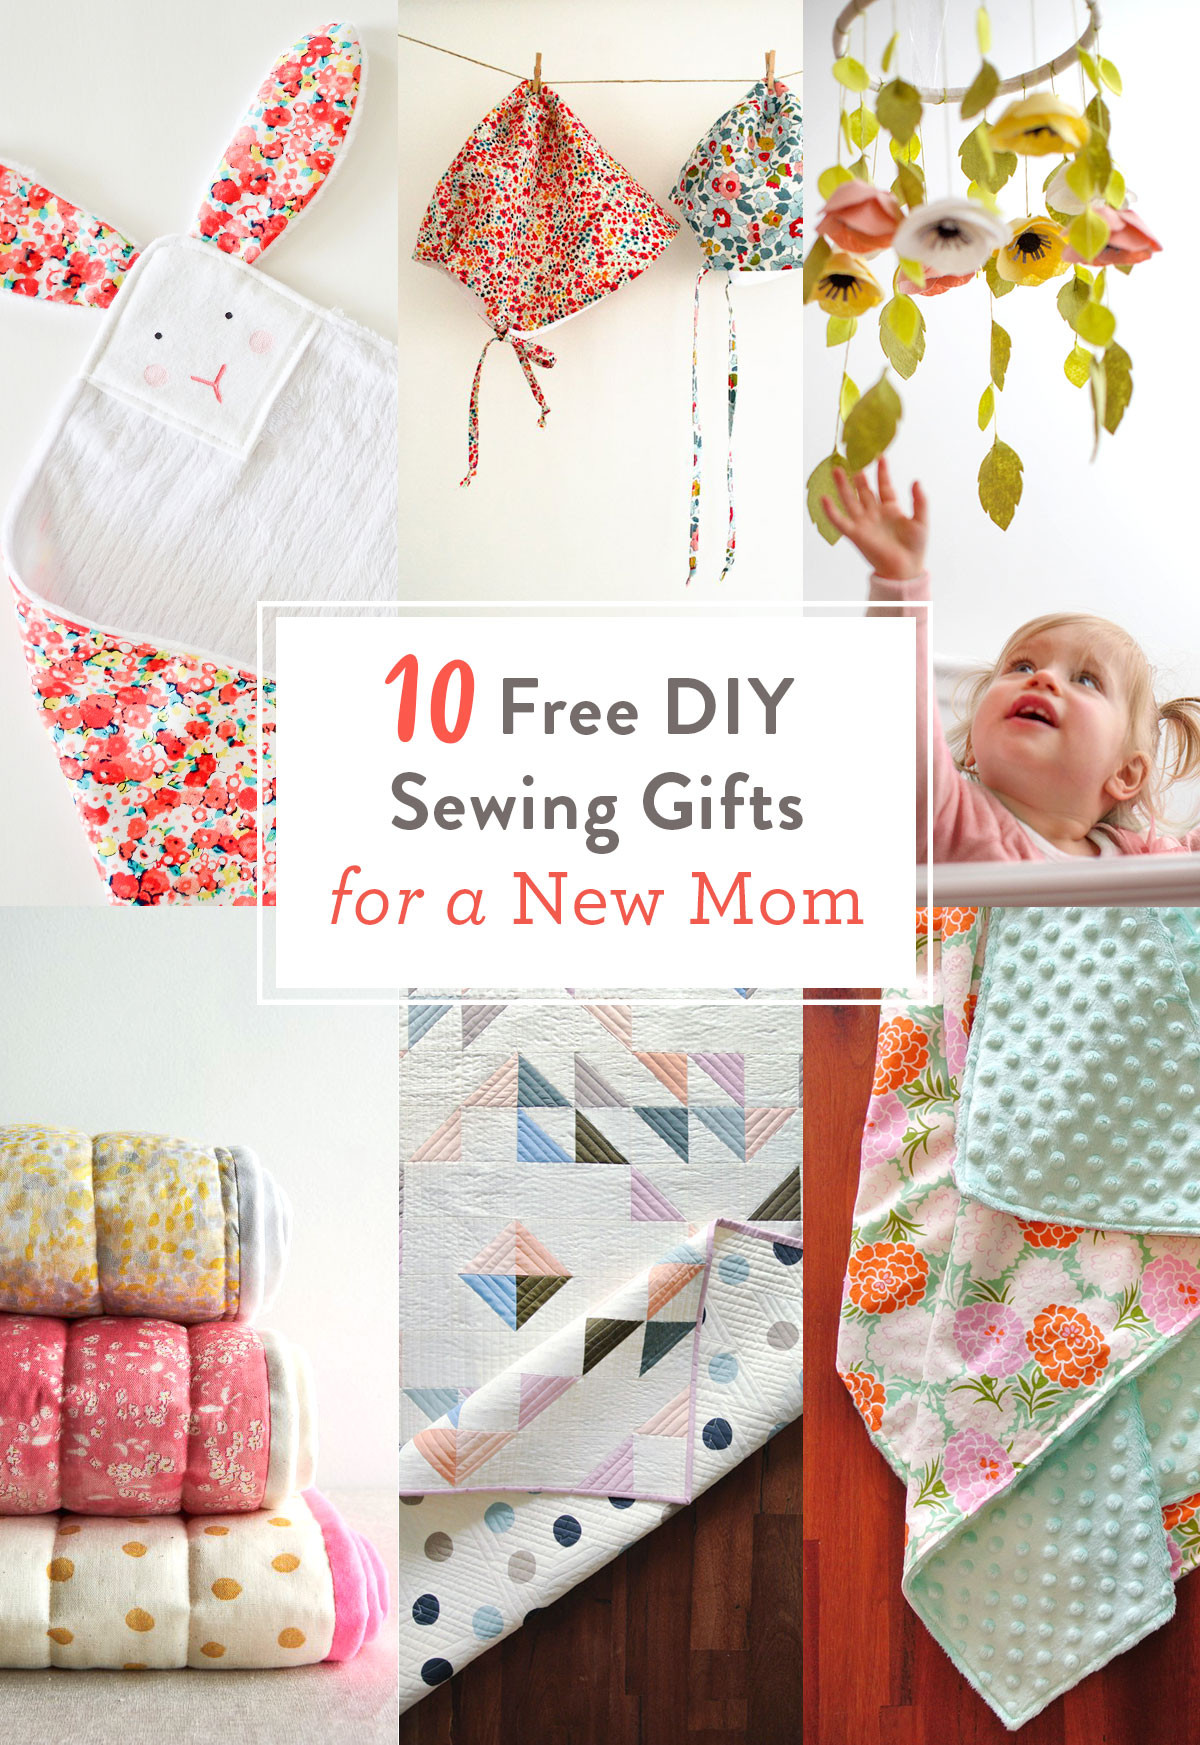 Homemade Baby Gifts Sewing
 FREE DIY Sewing Gifts for a New Mom Suzy Quilts